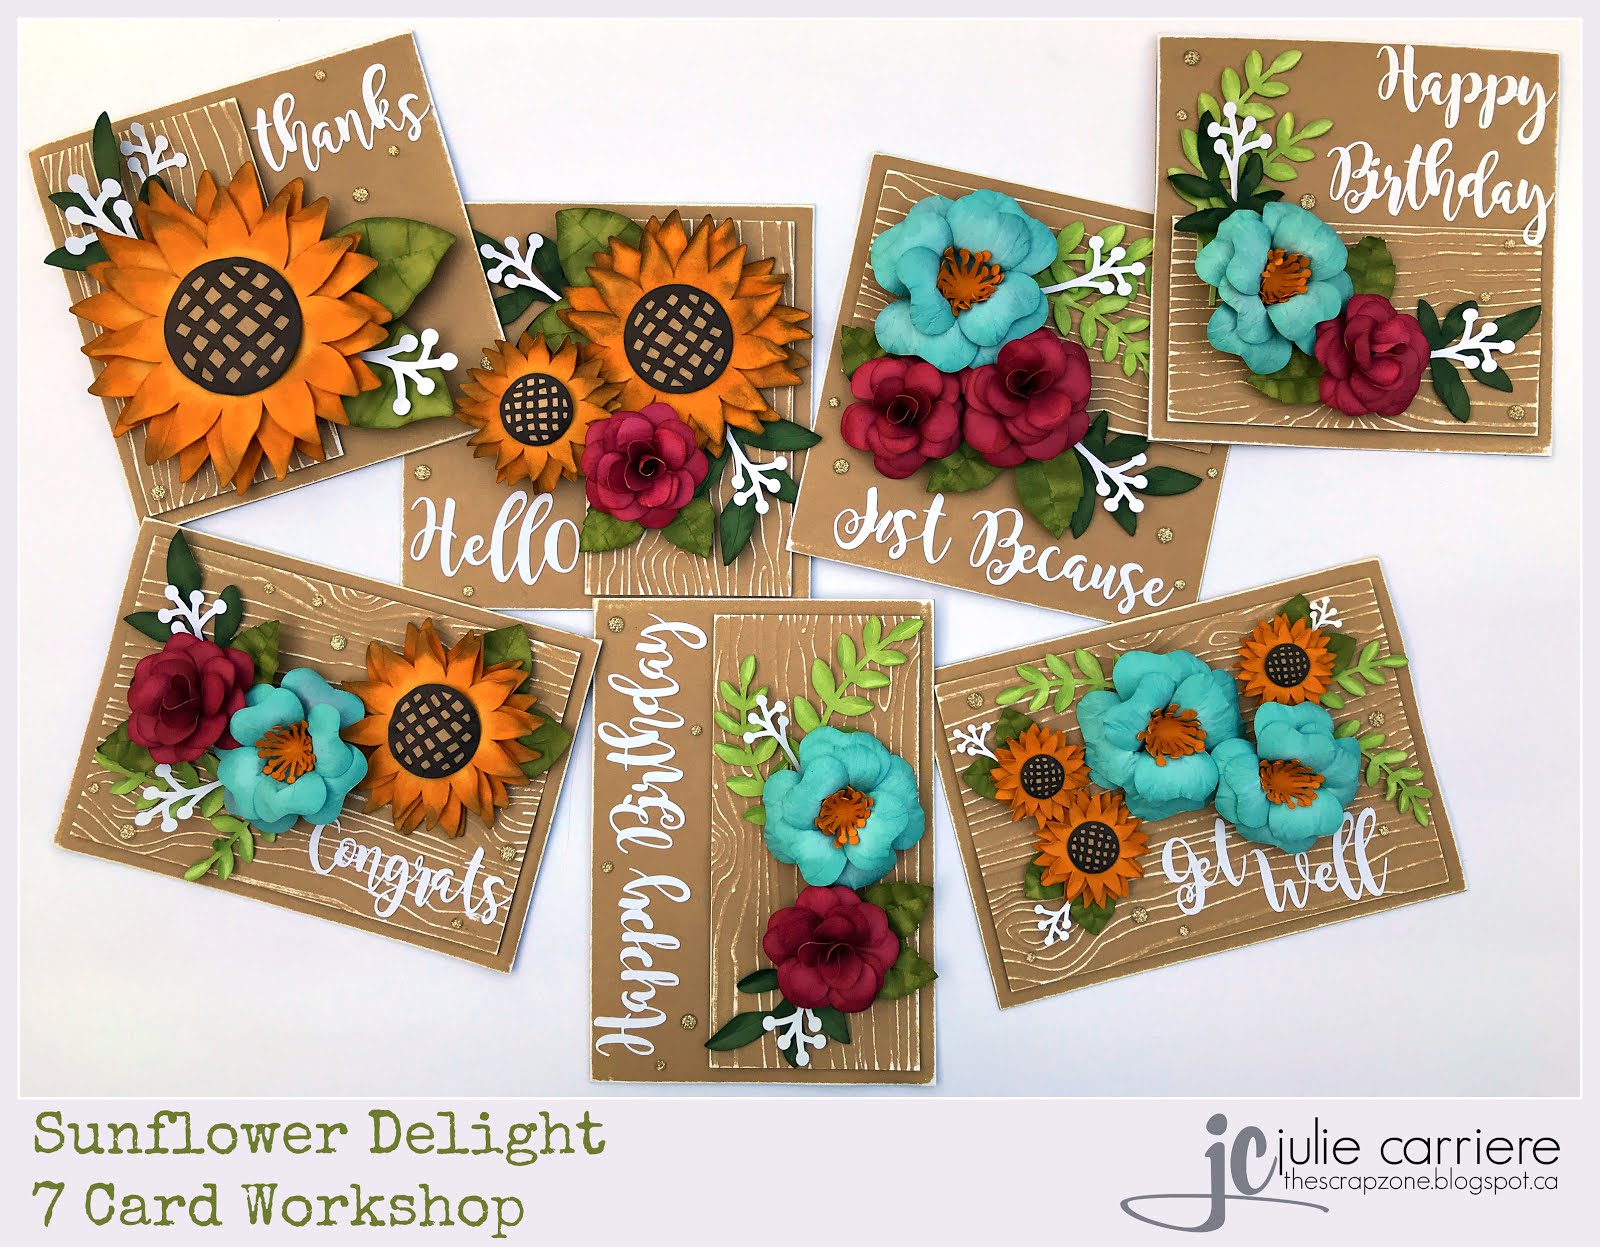 Sunflower Delight Cardmaking Assembly Guide